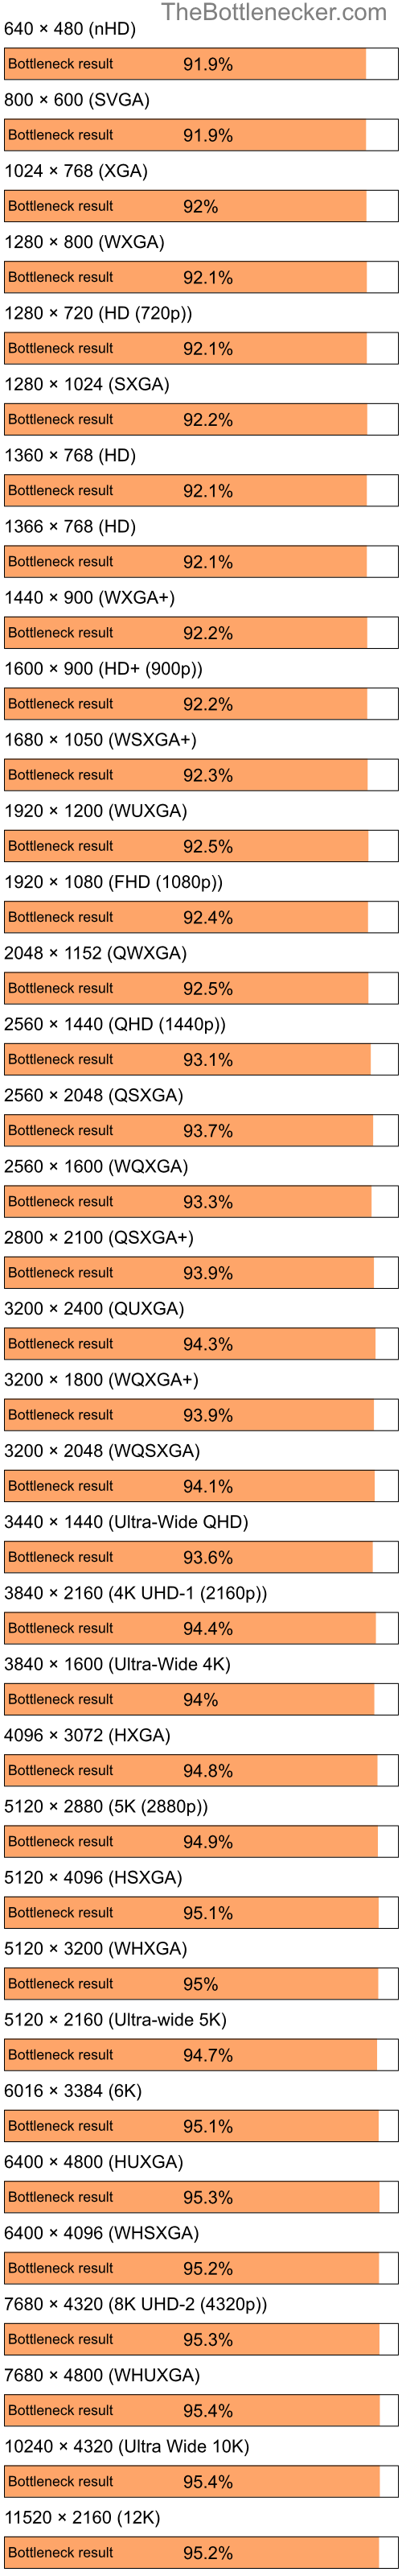 Bottleneck results by resolution for Intel Pentium 4 and NVIDIA GeForce3 Ti 200 in Graphic Card Intense Tasks